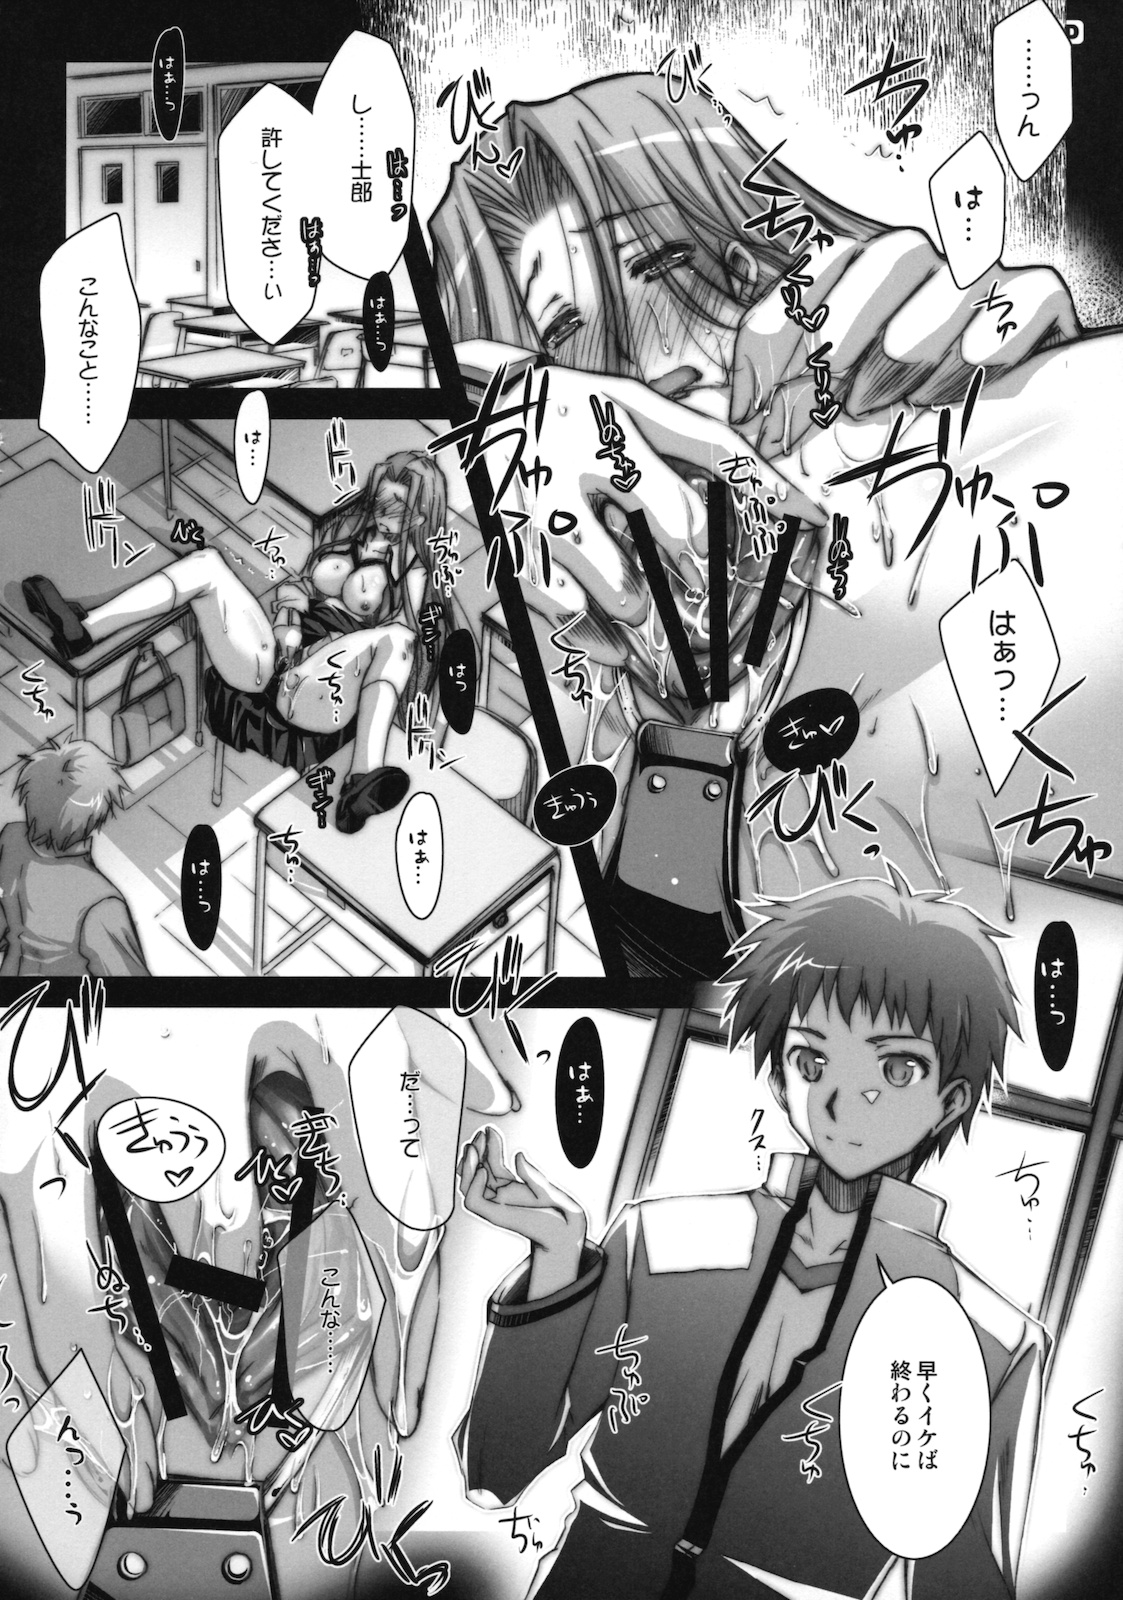 (COMIC1☆5) [Kaikinissyoku] R.O.D 7 -Rider or Die- (Fate/stay night) (COMIC1☆5) [怪奇日蝕] R・O・D 7 -Rider or Die- (Fate)